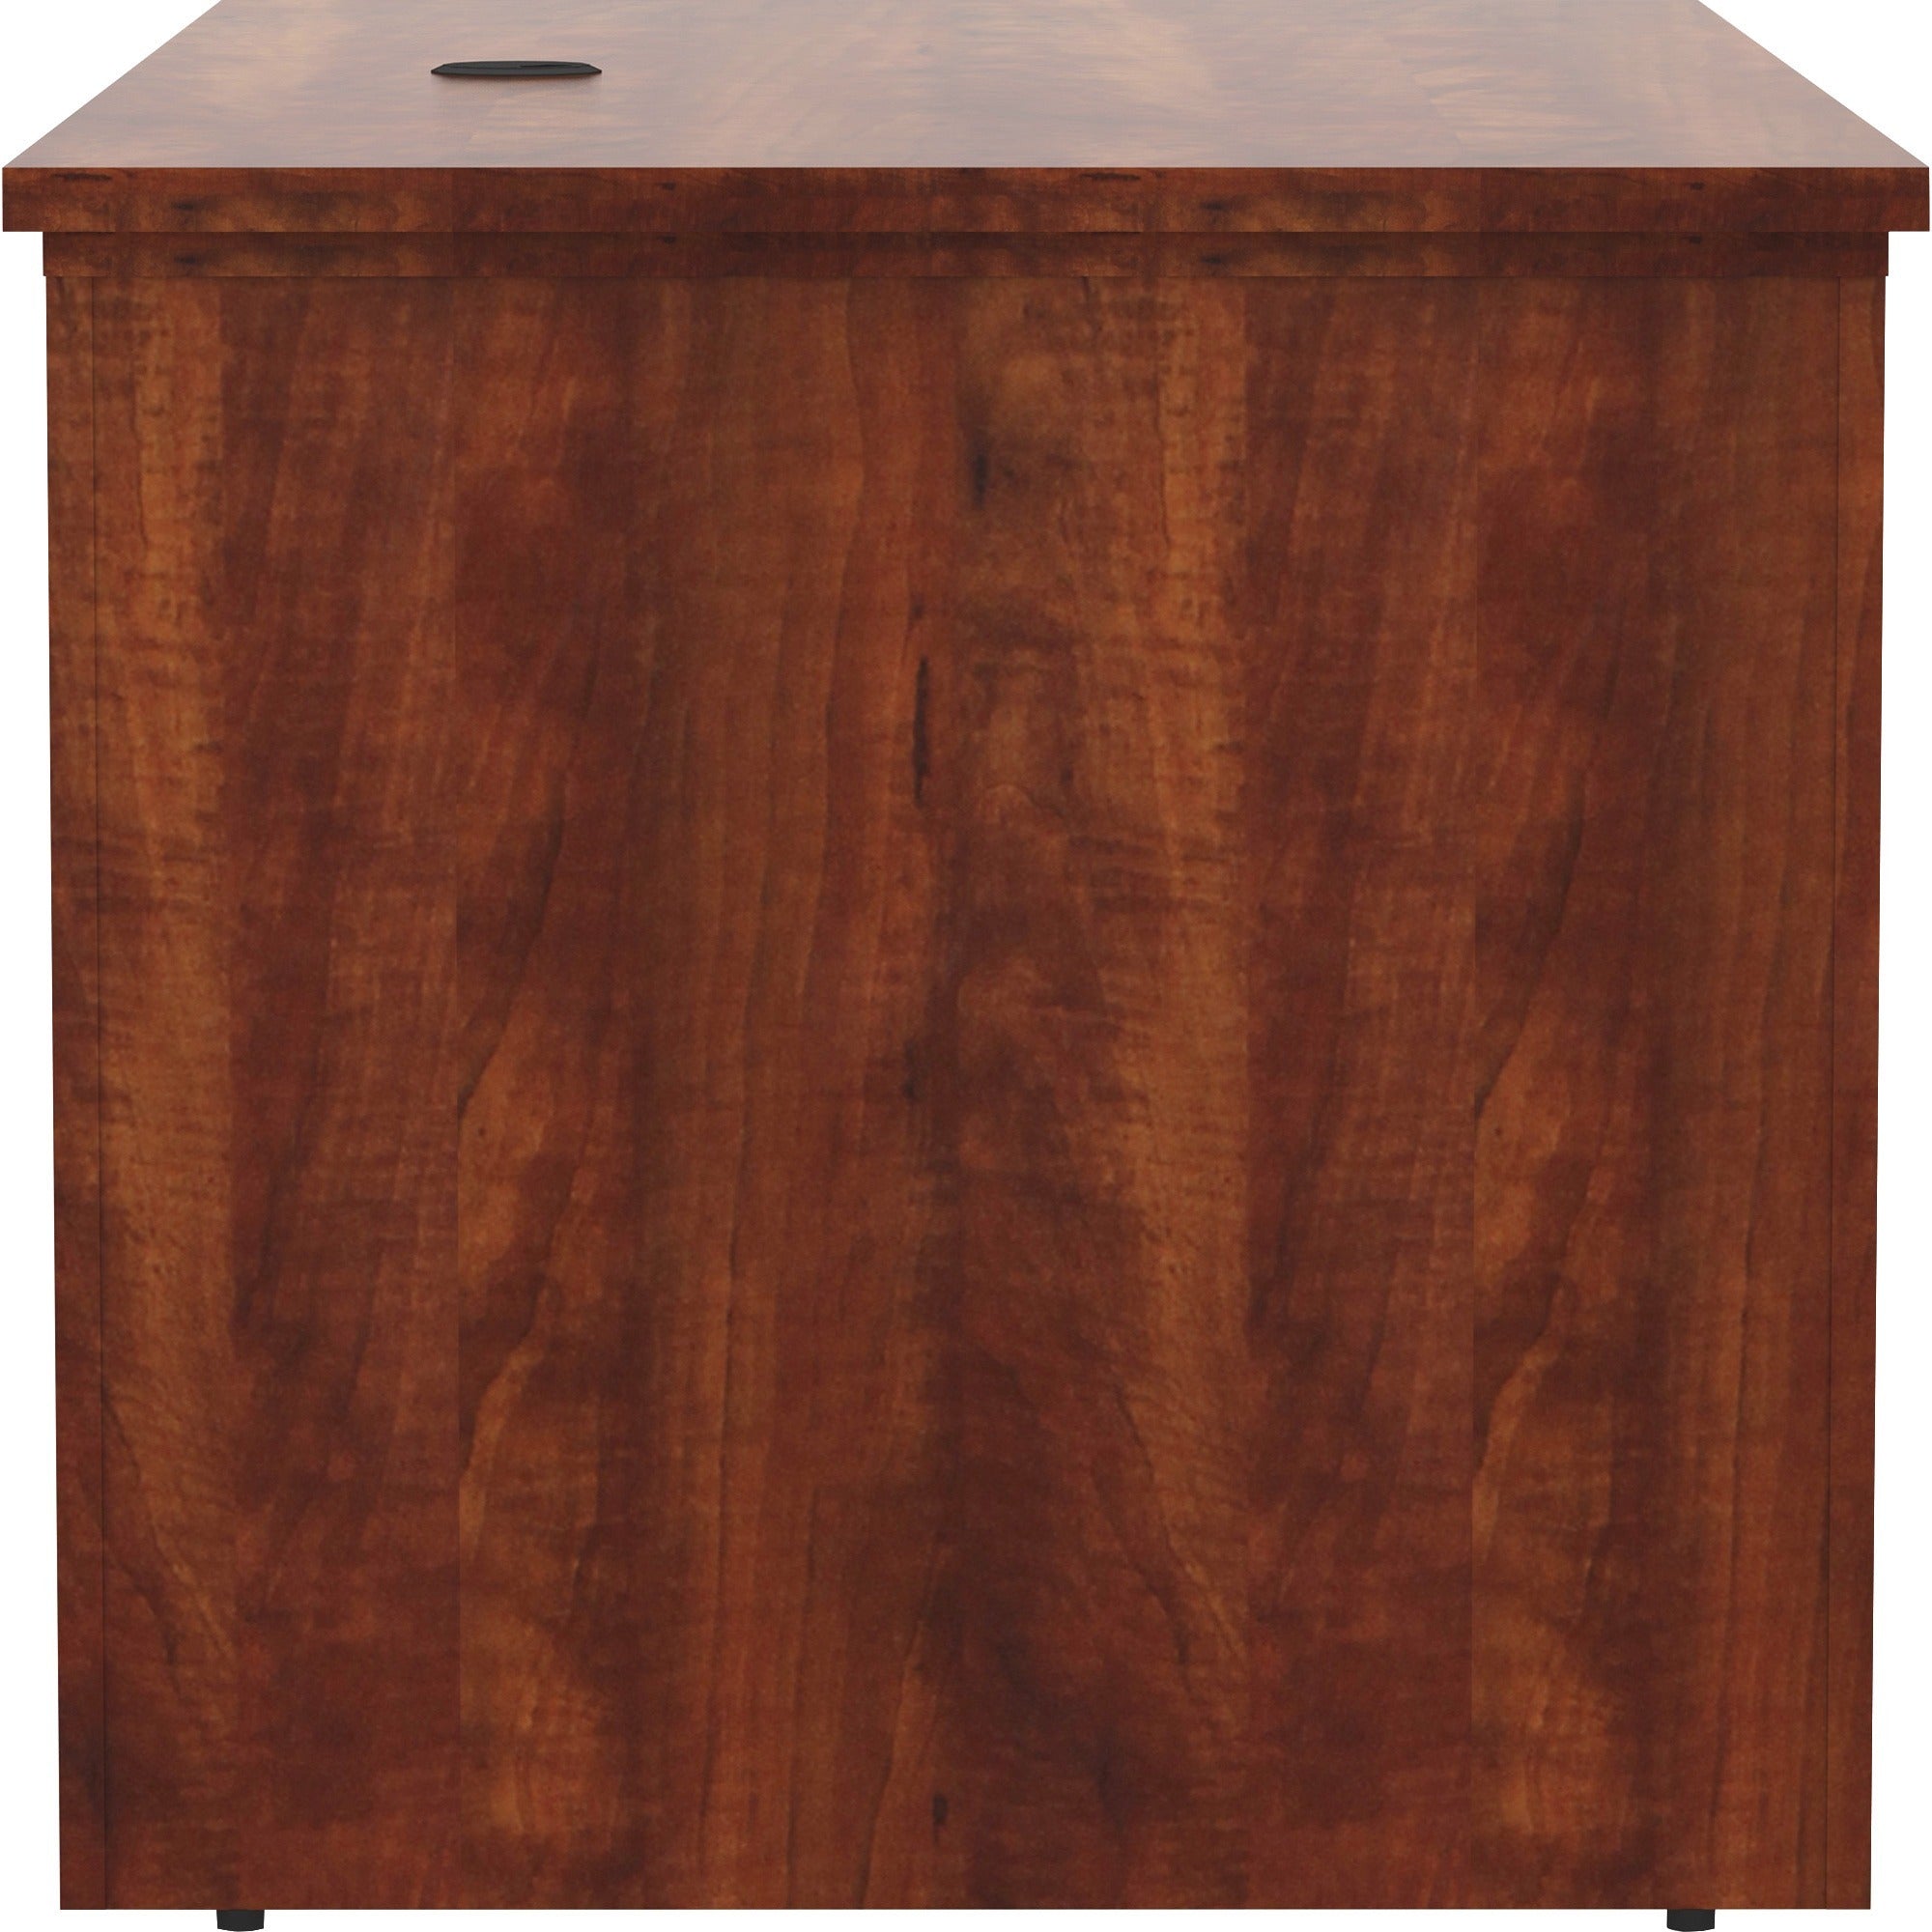 lorell-essentials-series-sit-to-stand-desk-shell-01-top-1-edge-60-x-2949-finish-cherry-laminate-table-top_llr69570 - 3